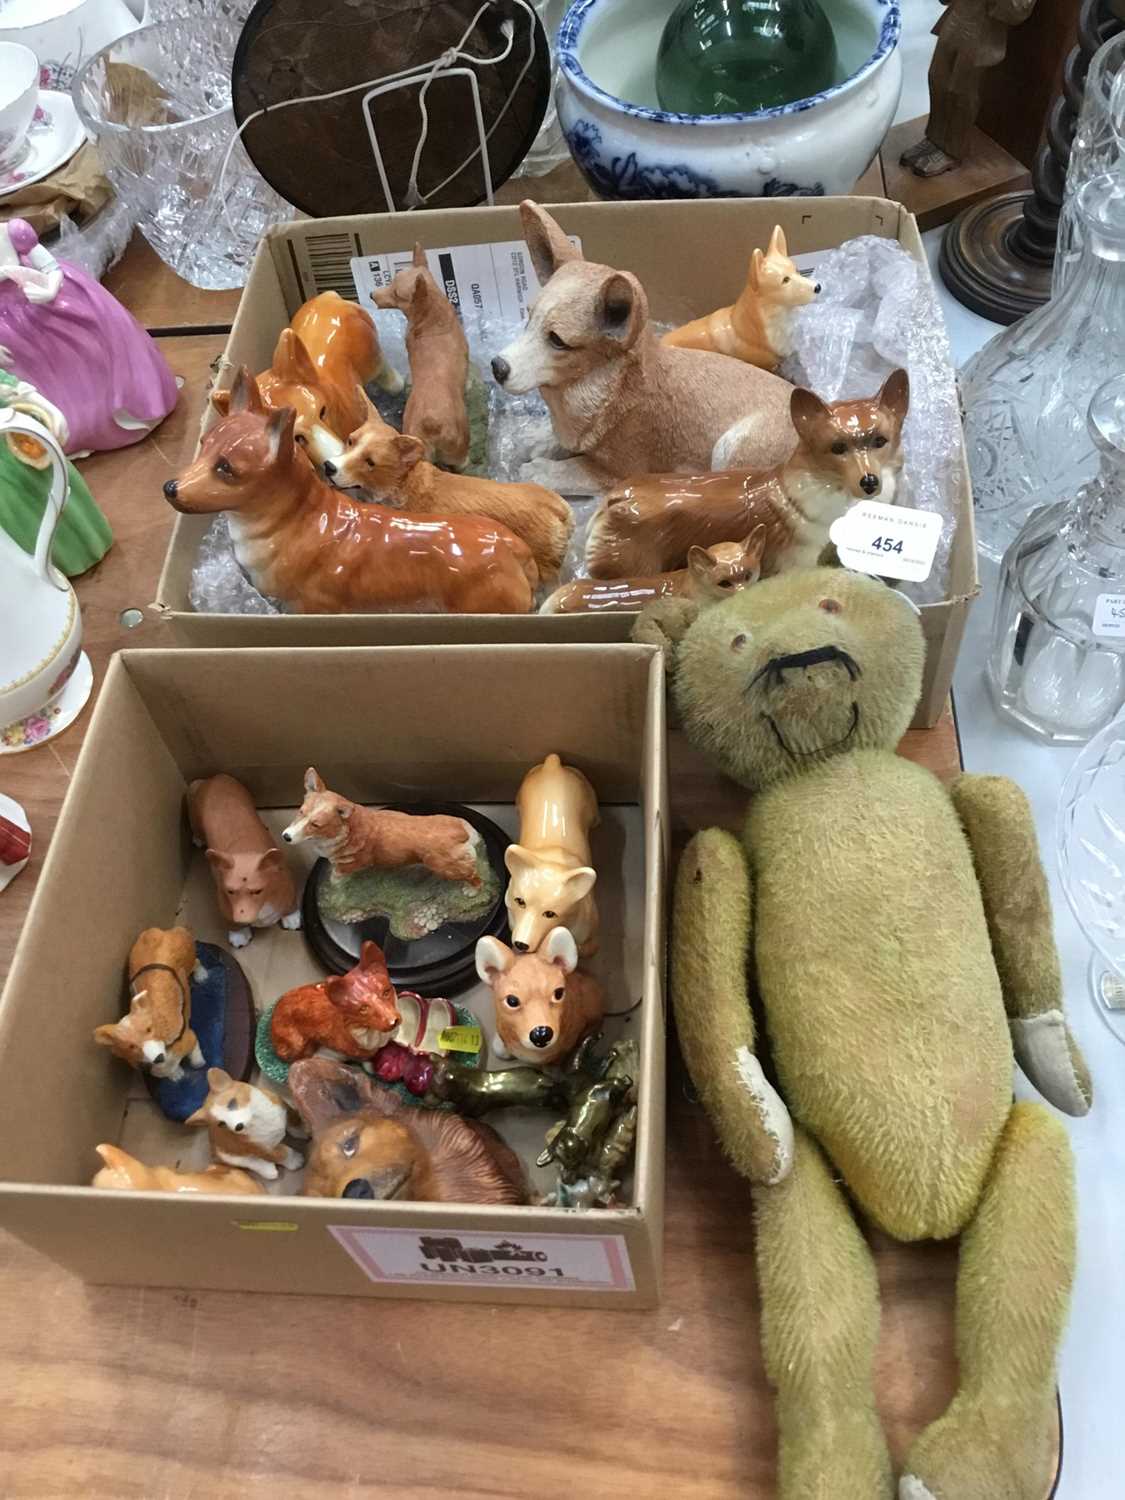 Old teddy bear ( approximately 90 years old) and a collection of Corgi ornaments